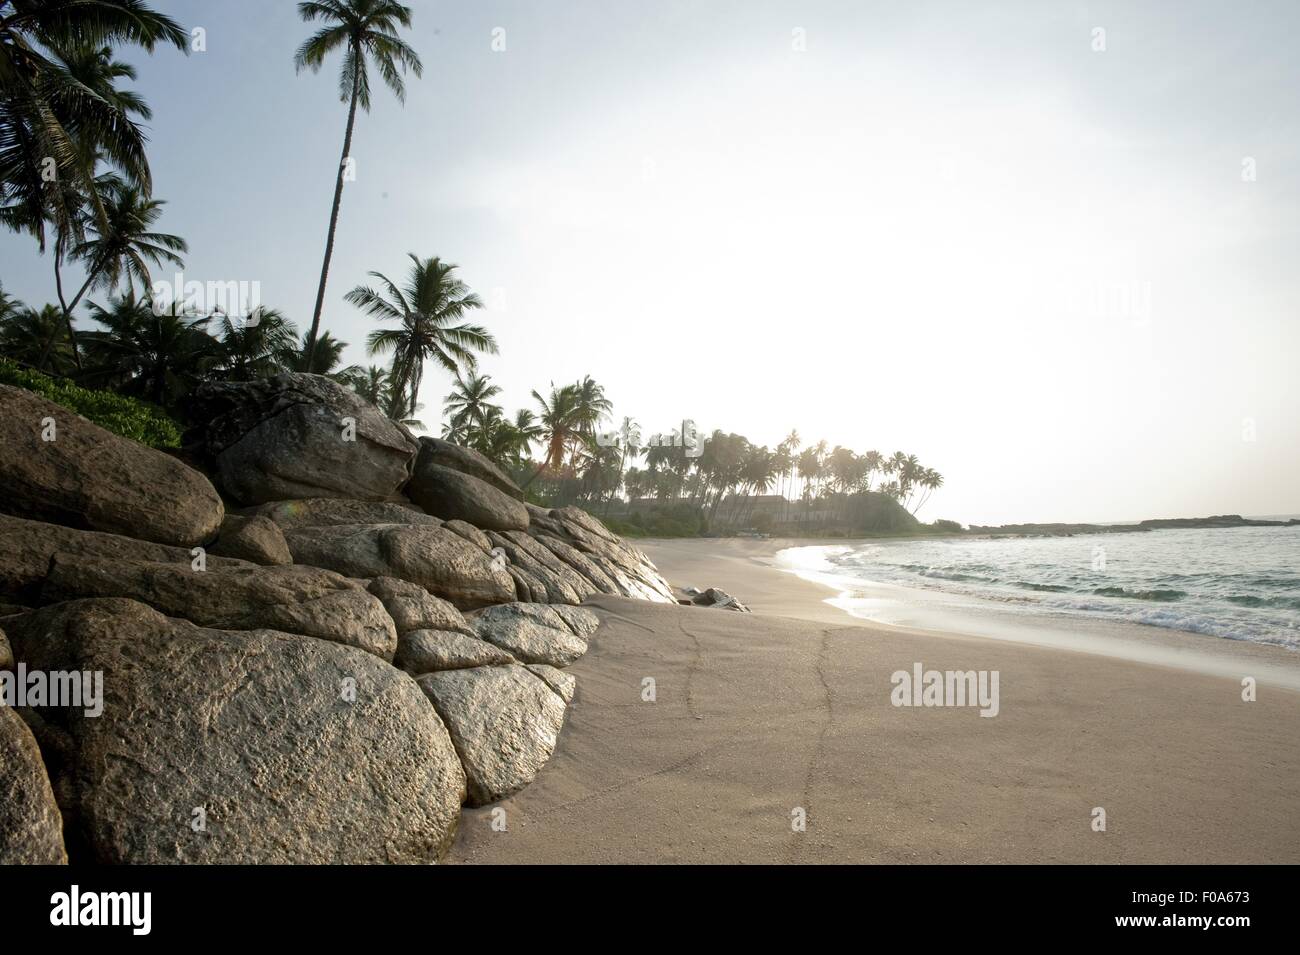 View of palm trees and Tangalle beach in Hambantota District, Southern Province, Sri Lanka Stock Photo